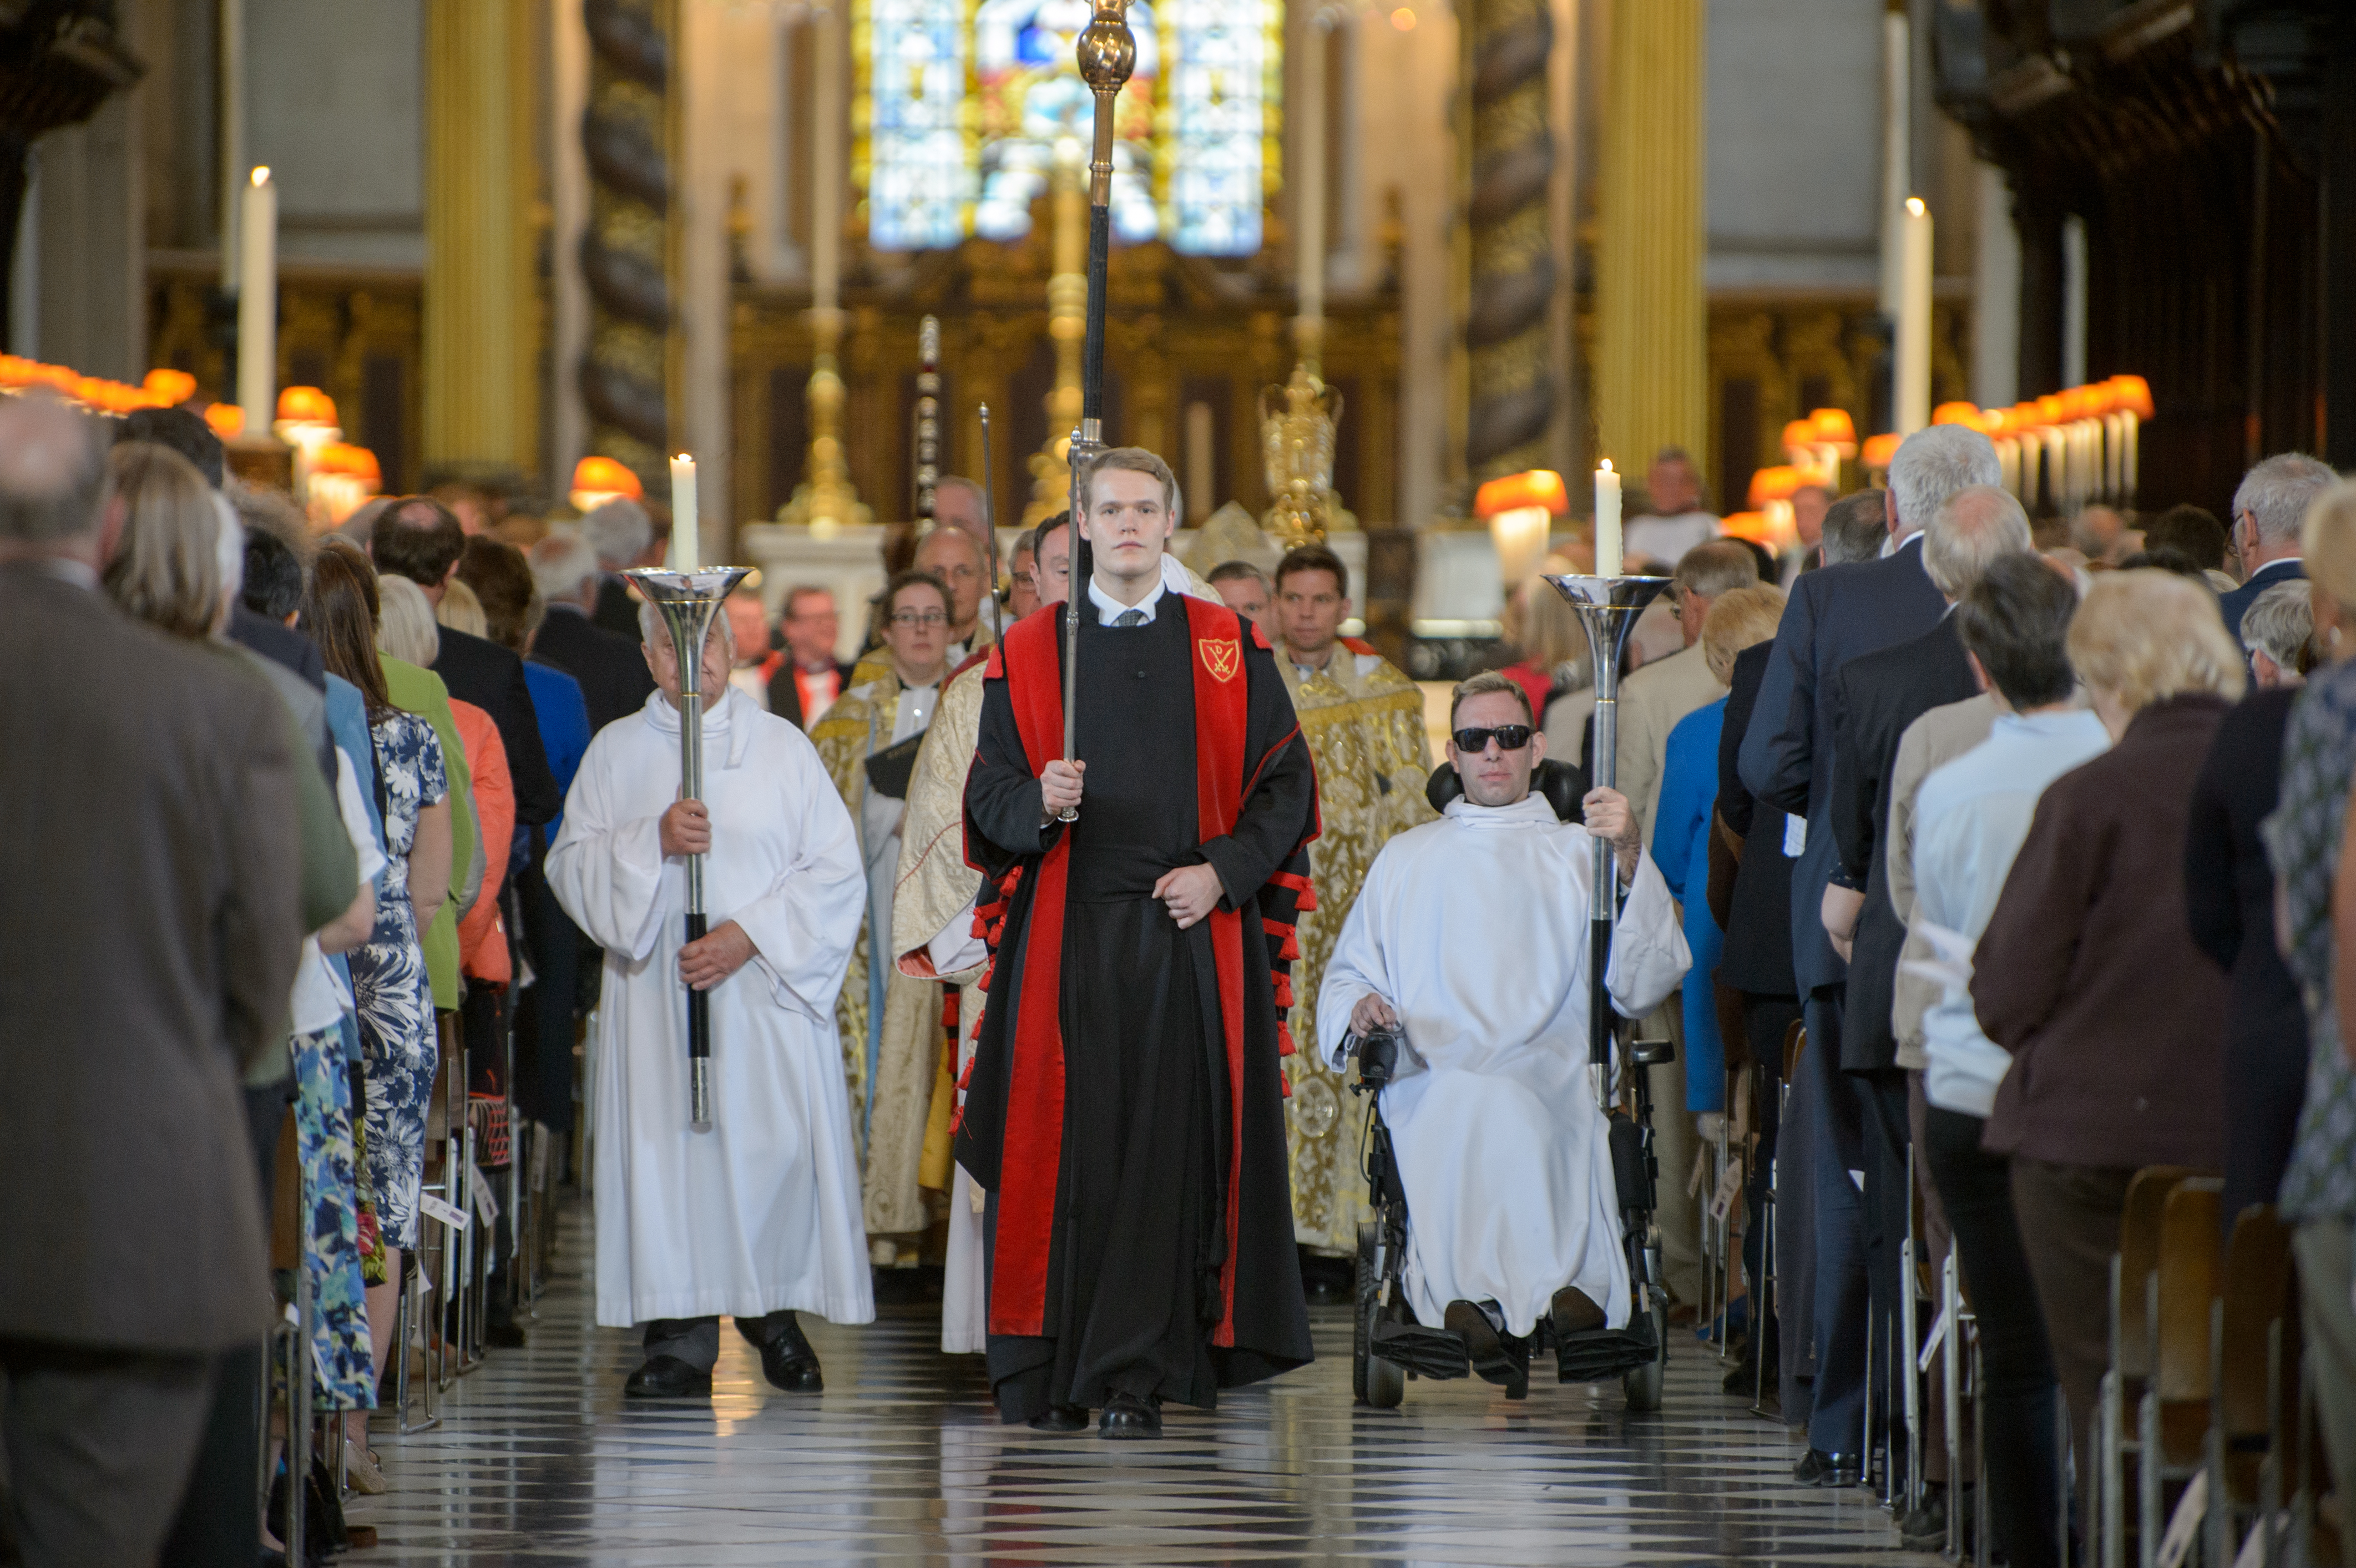 Festival 2019 - Clergy Recessional